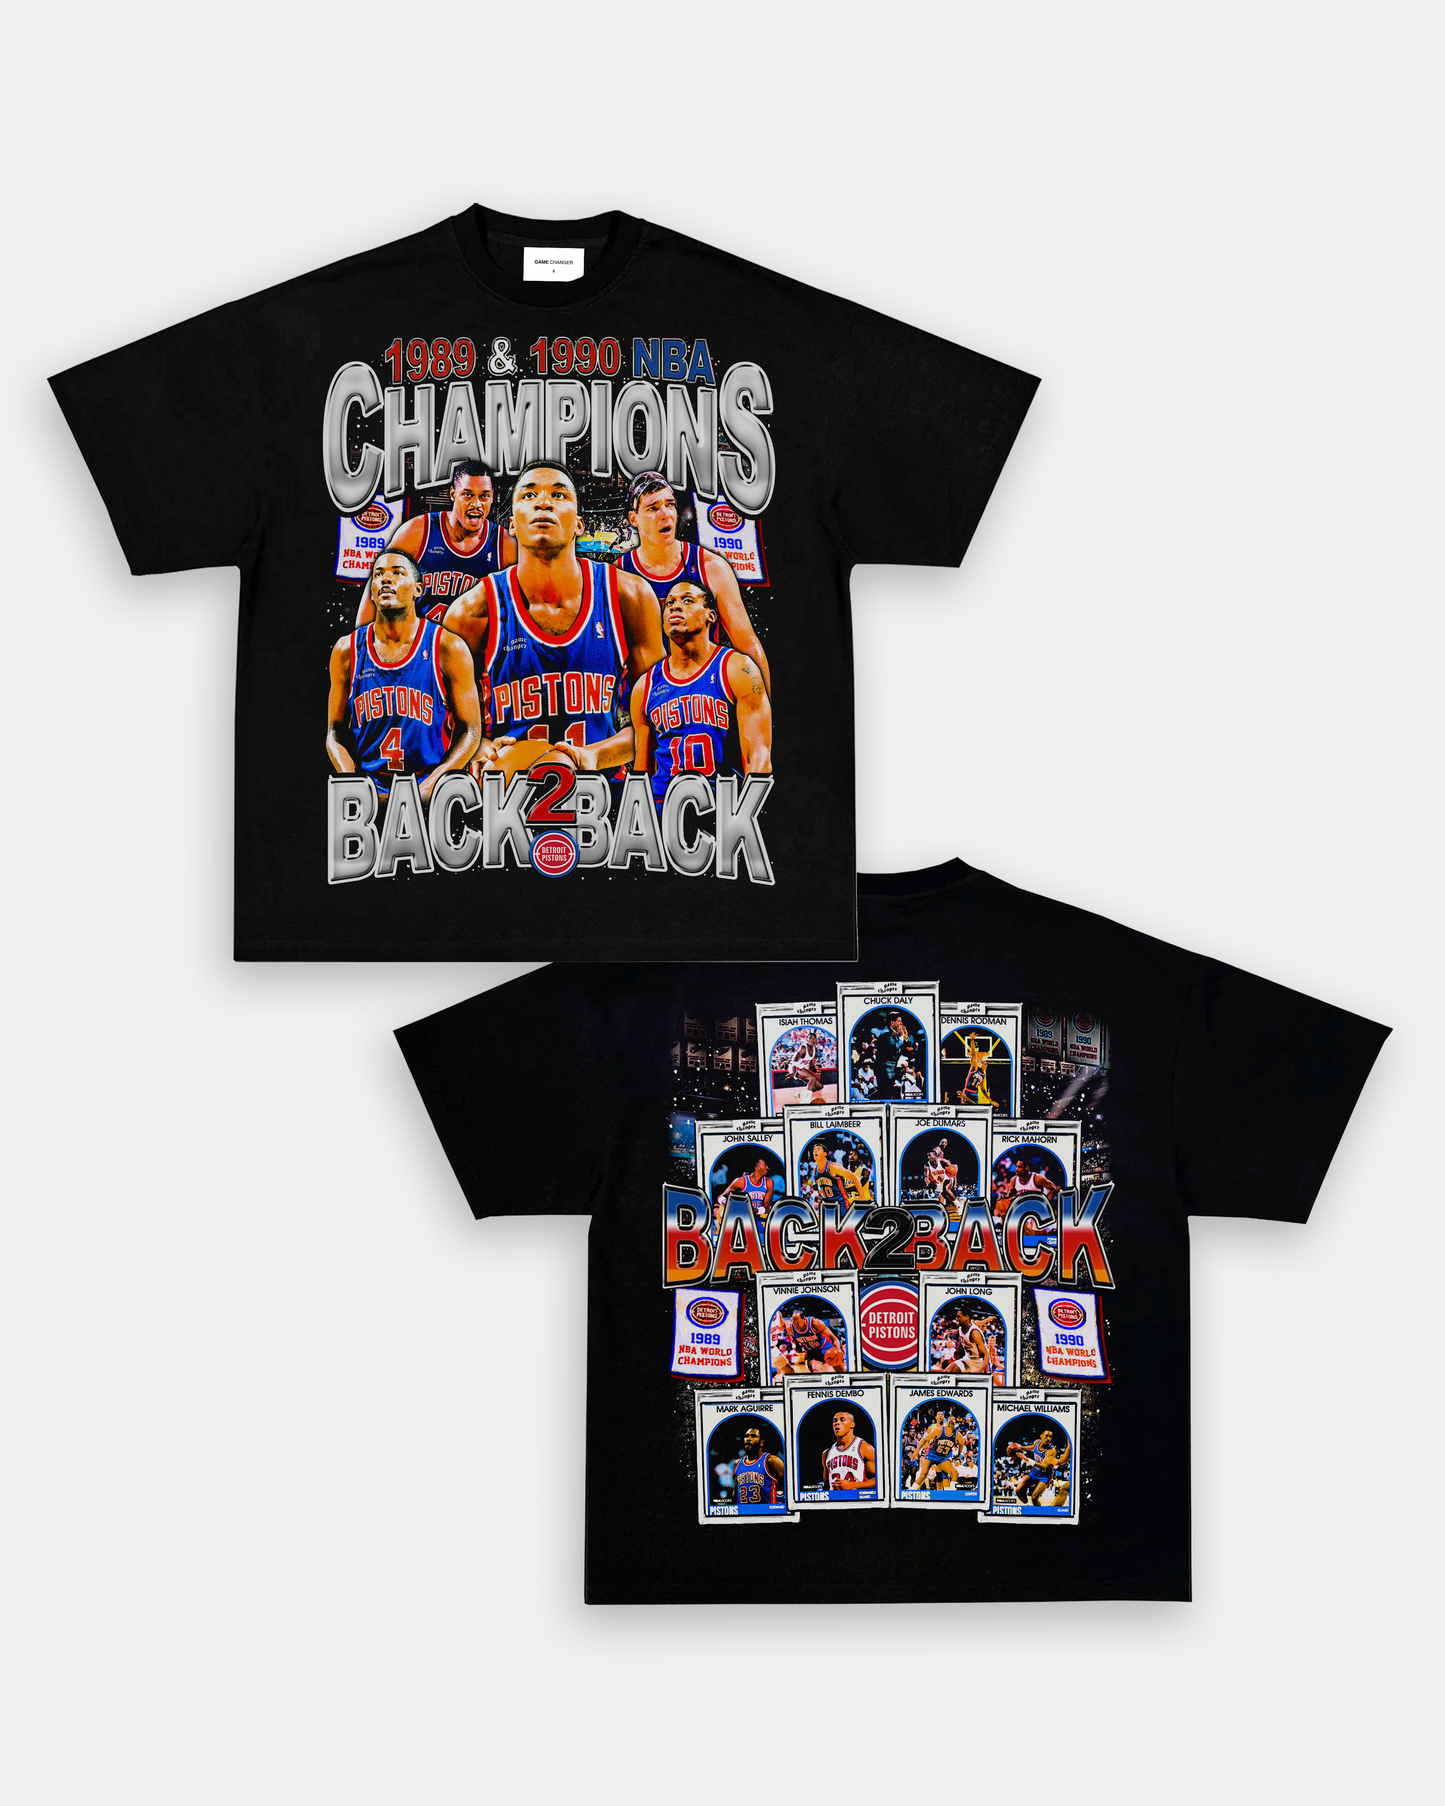 89 & 90 NBA CHAMPS TEE - [DS]